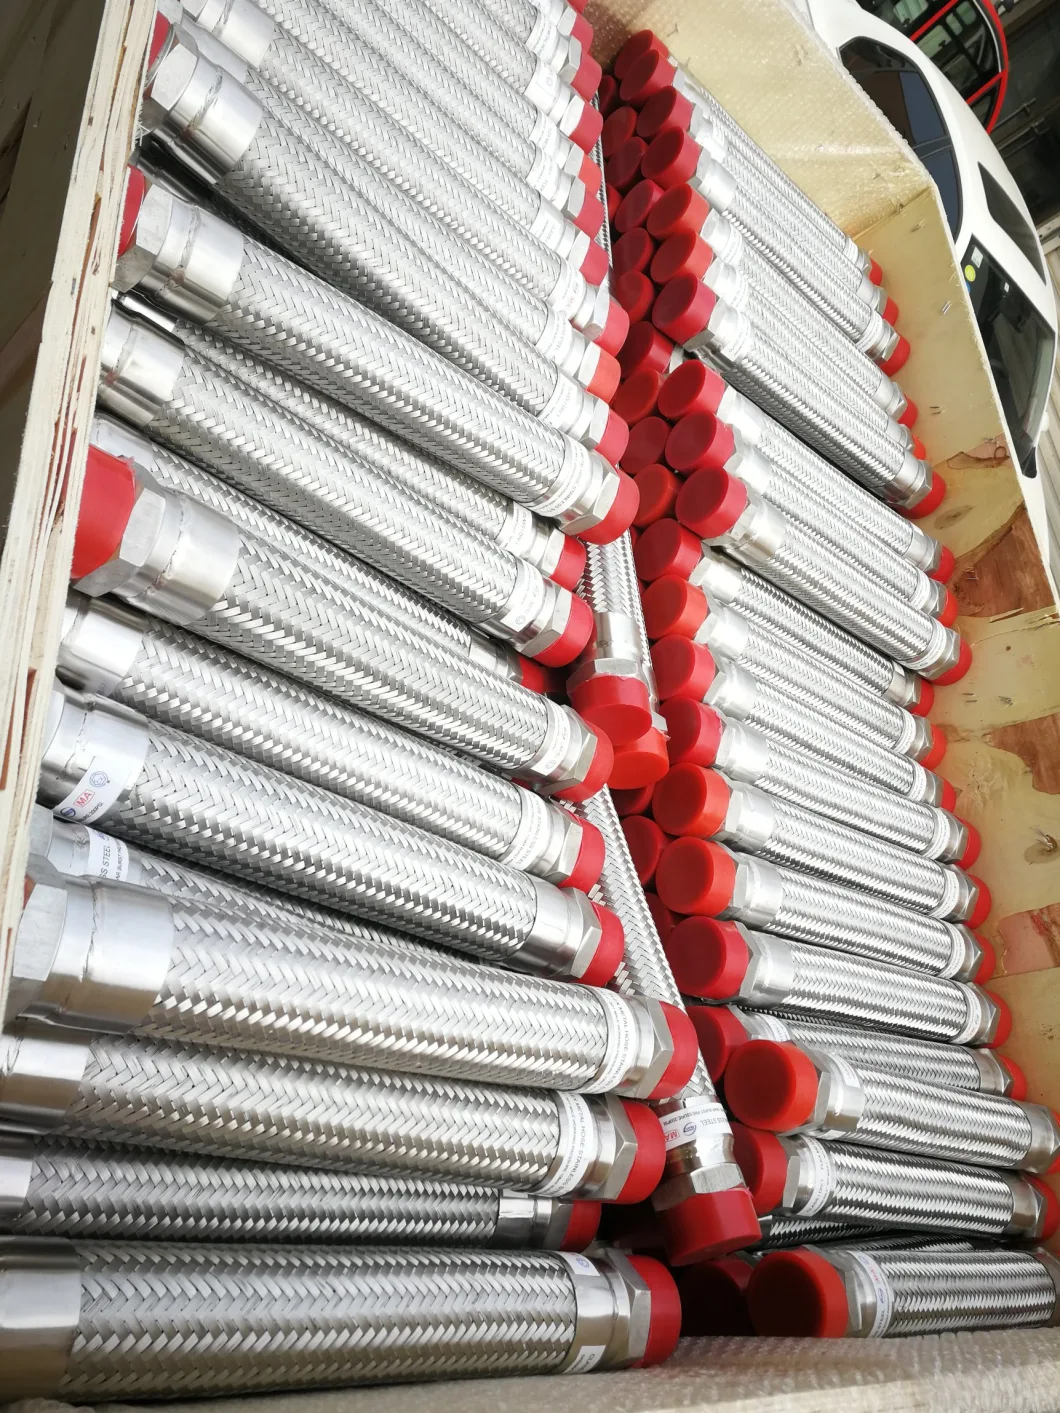 Stainless Steel Corrugated/Convoluted Flexible Metal Hose